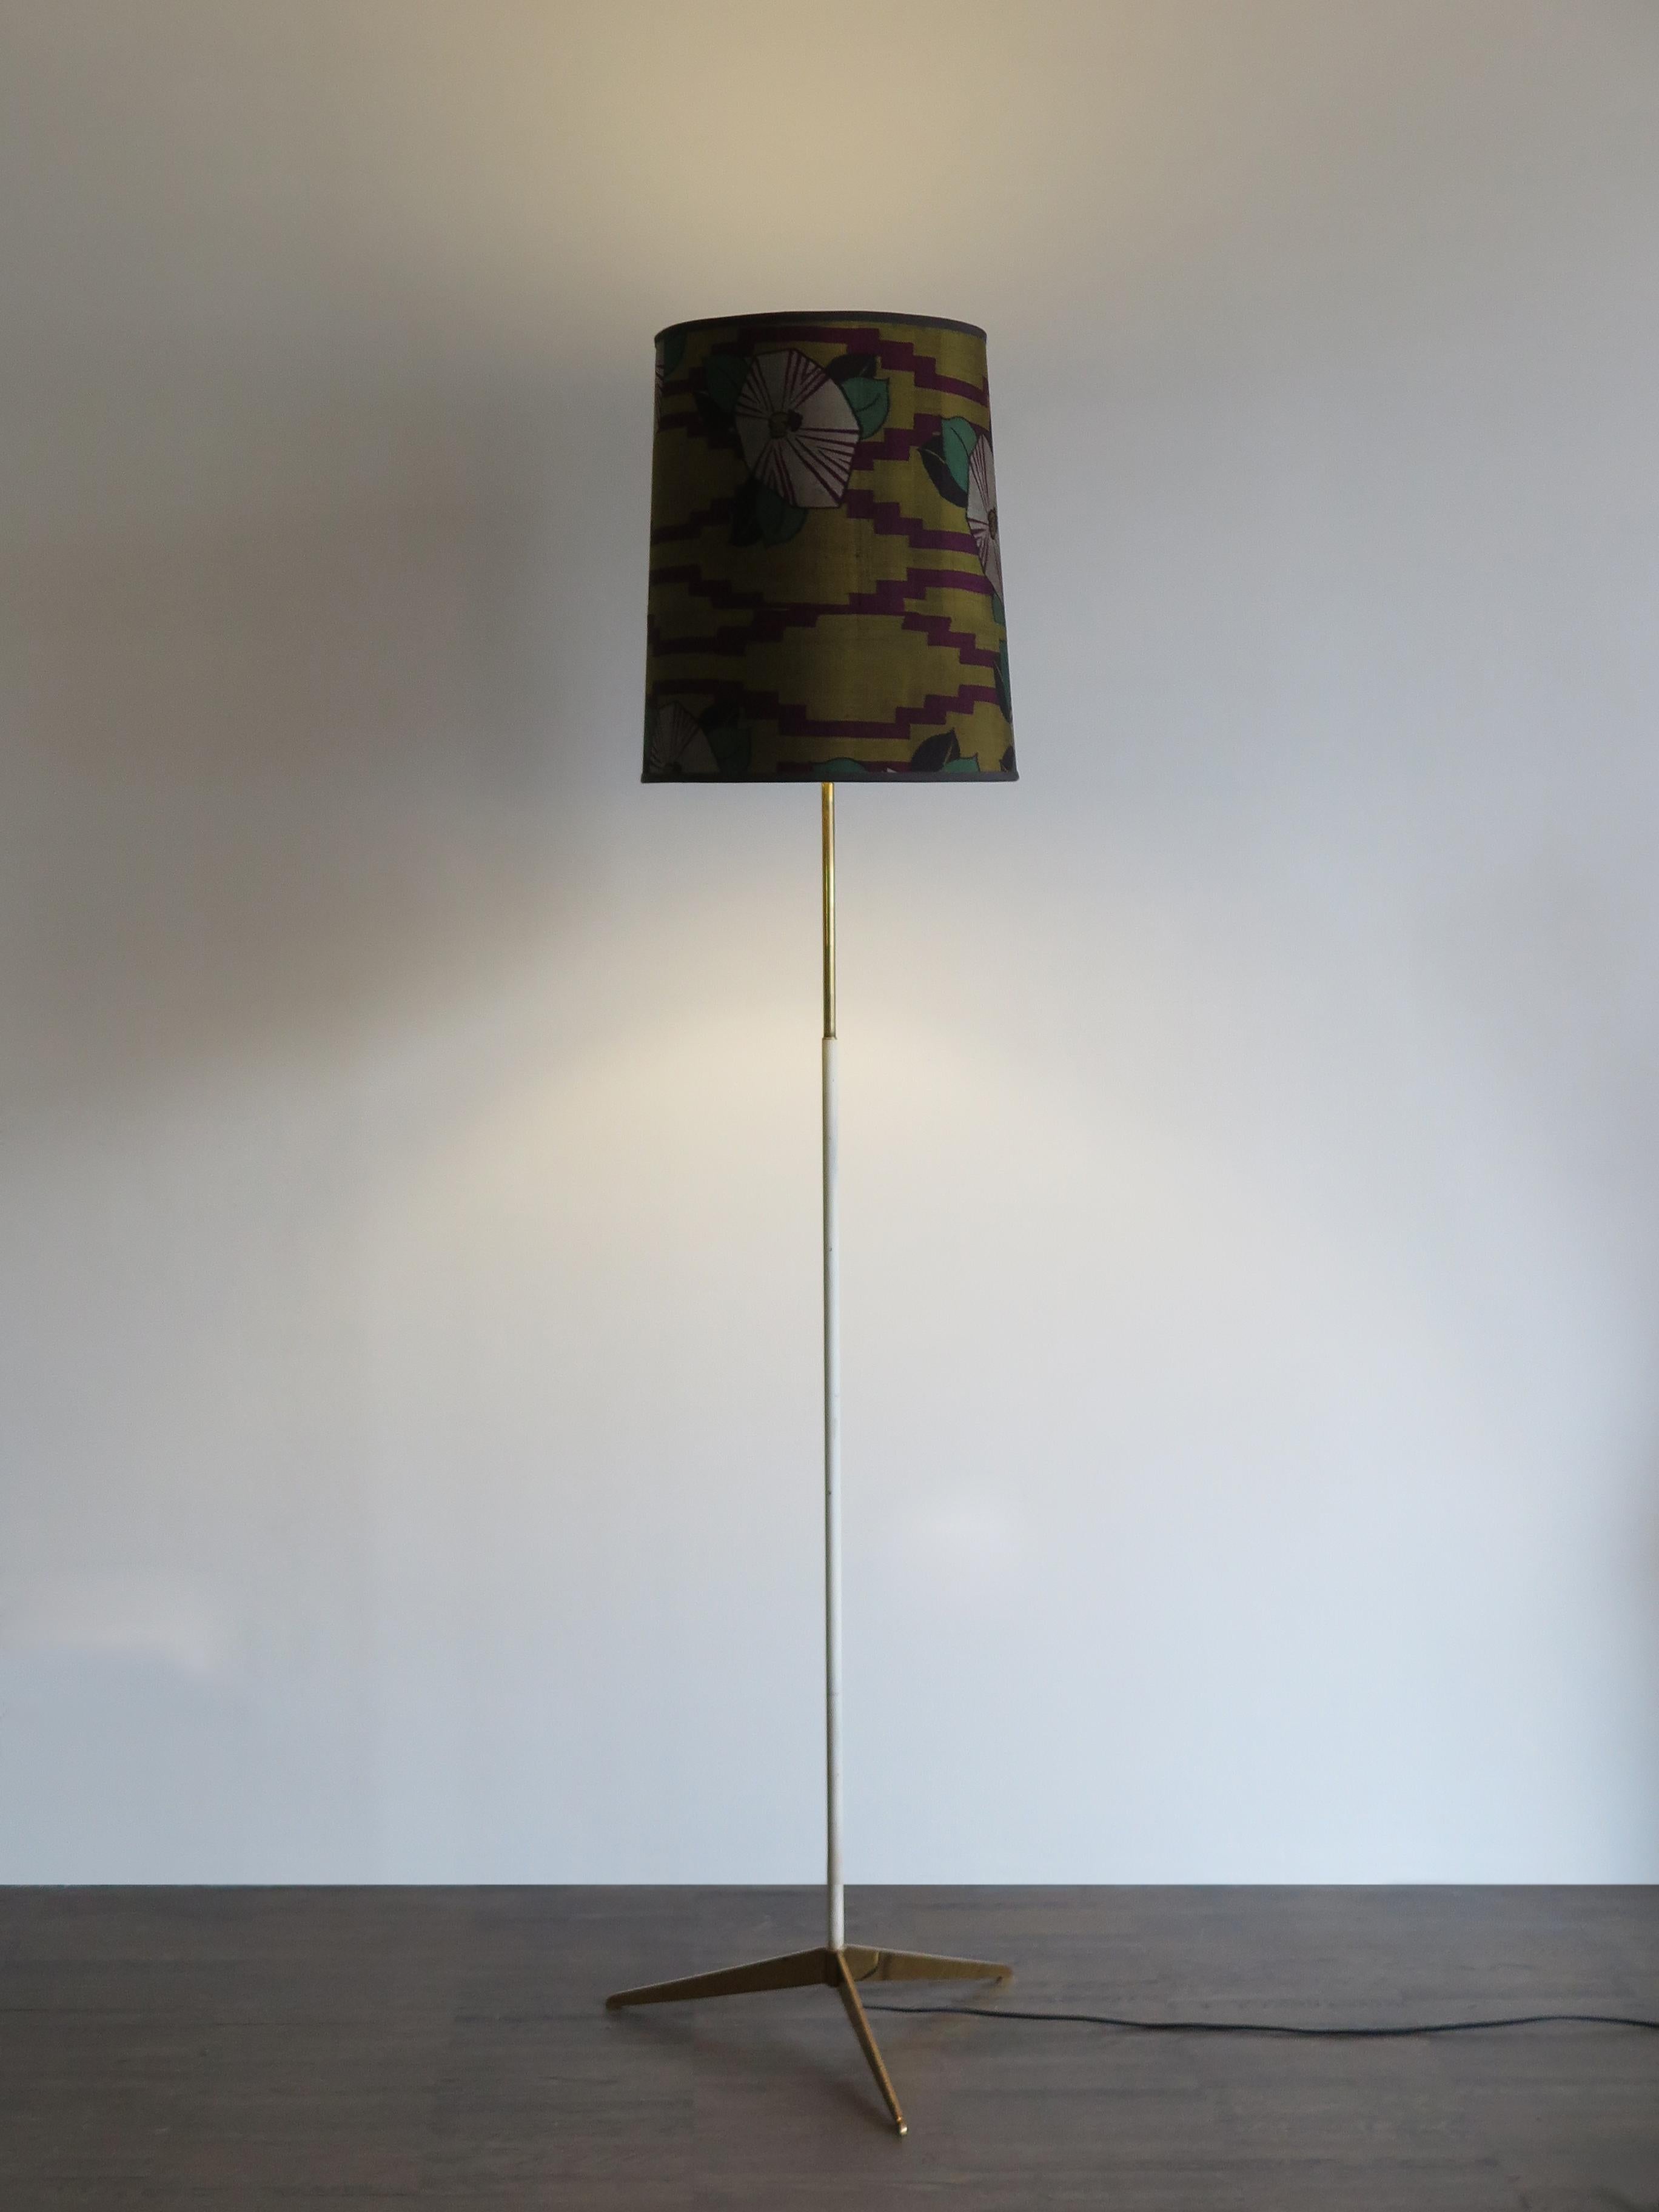 Italian Stilnovo Mid-Century Modern floor lamp with brass base with silk lampshade redone with antique Japanese Kimono and manufacturing label, circa 1950s.

Please note that the lamp is original of the period and this shows normal signs of age